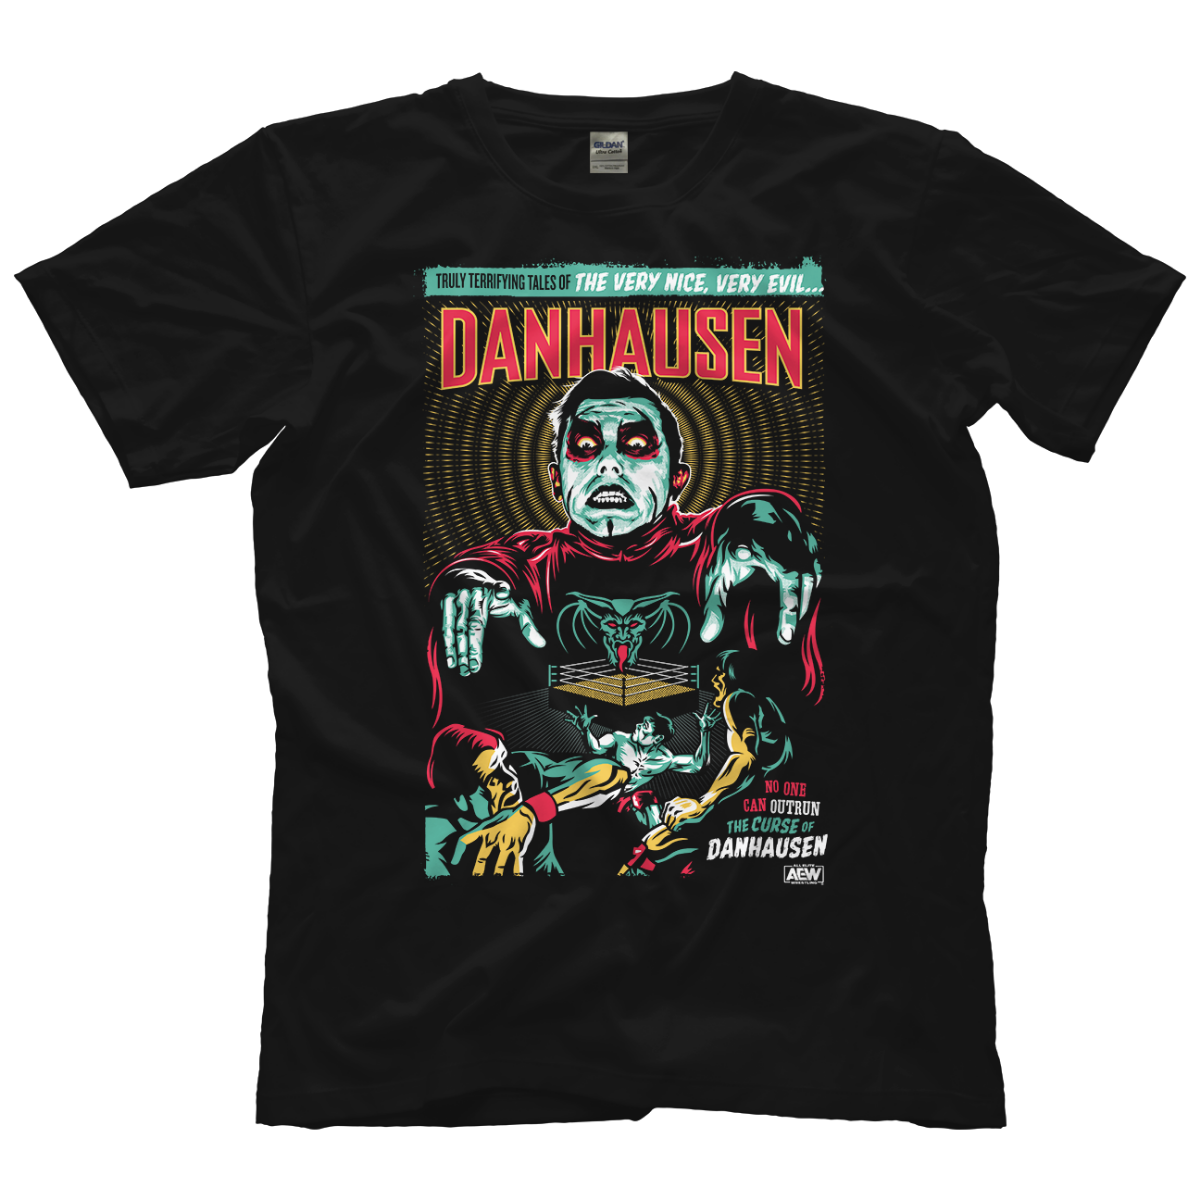 Danhausen on X: The First Official @AEW micro brawler of Danhausen is up  for preorder now. Go buy a million so Danhausen can make more demands    / X